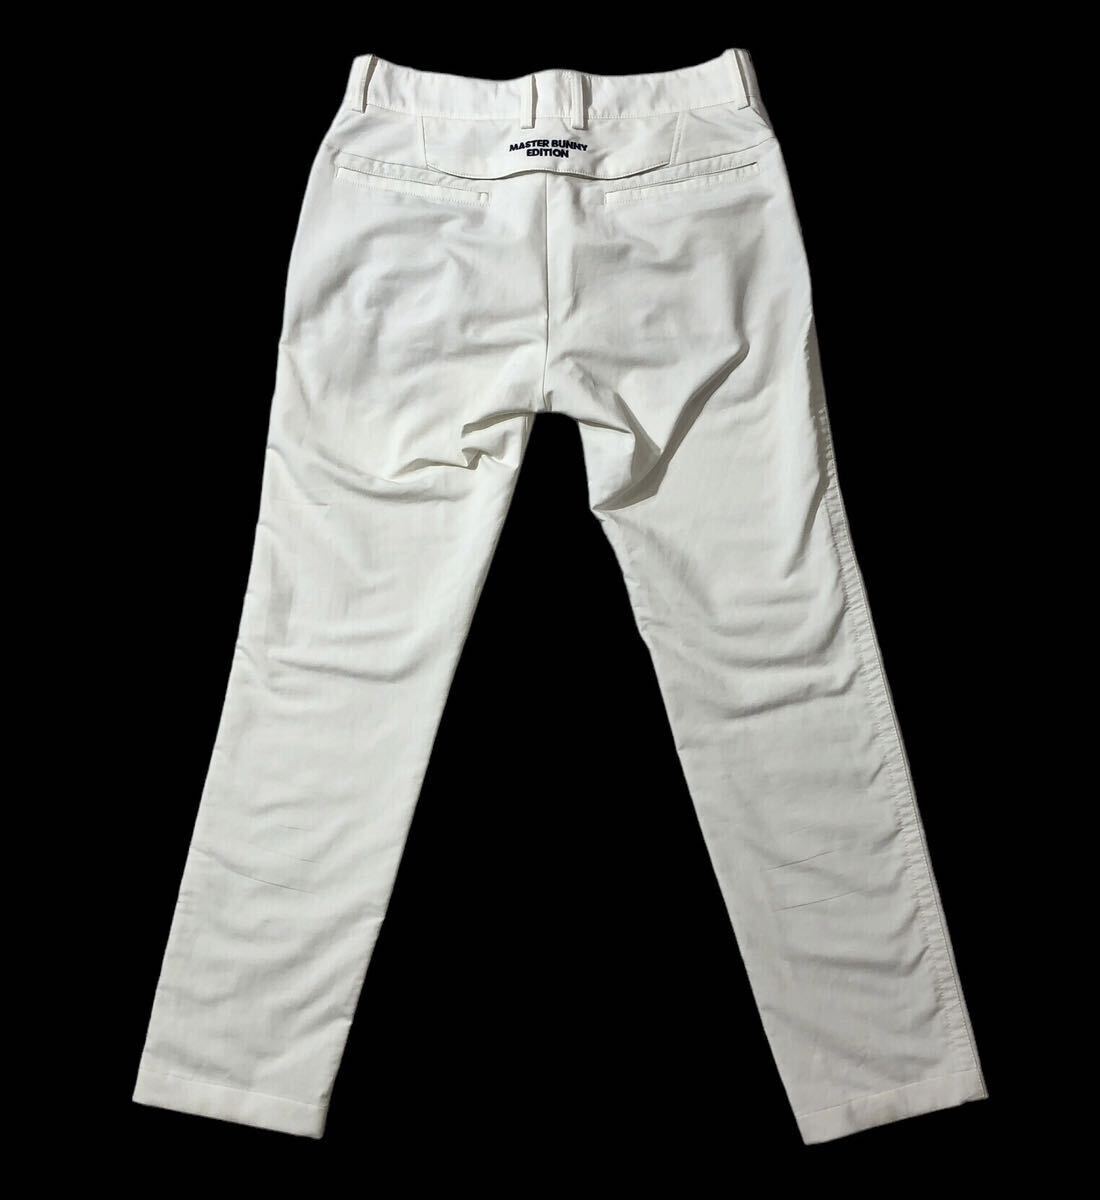 * MASTER BUNNY master ba knee Pearly Gates *ba knee ear Logo embroidery stretch material Golf pants white 4